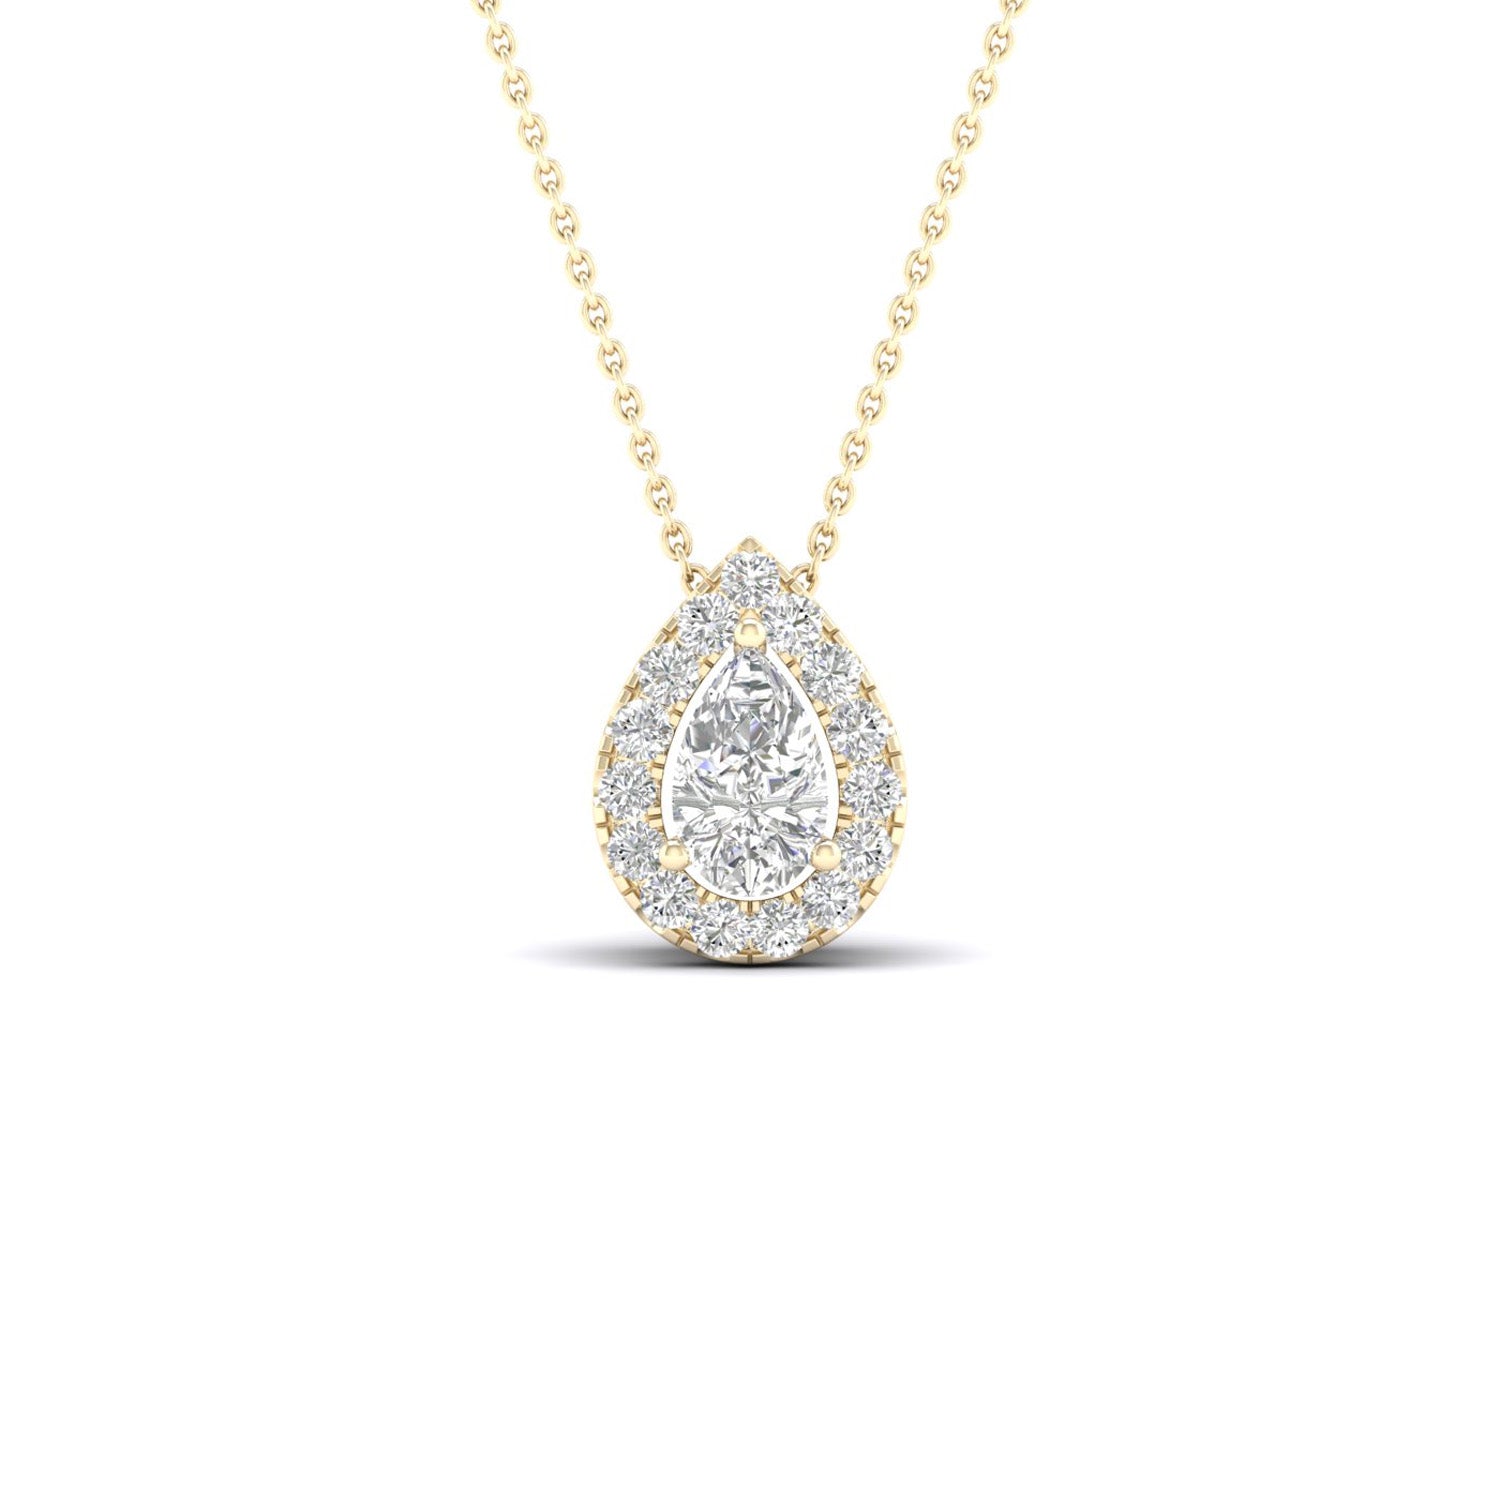 Petite Dewdrop Halo Necklace_Product angle_1/6 Ct. - 2